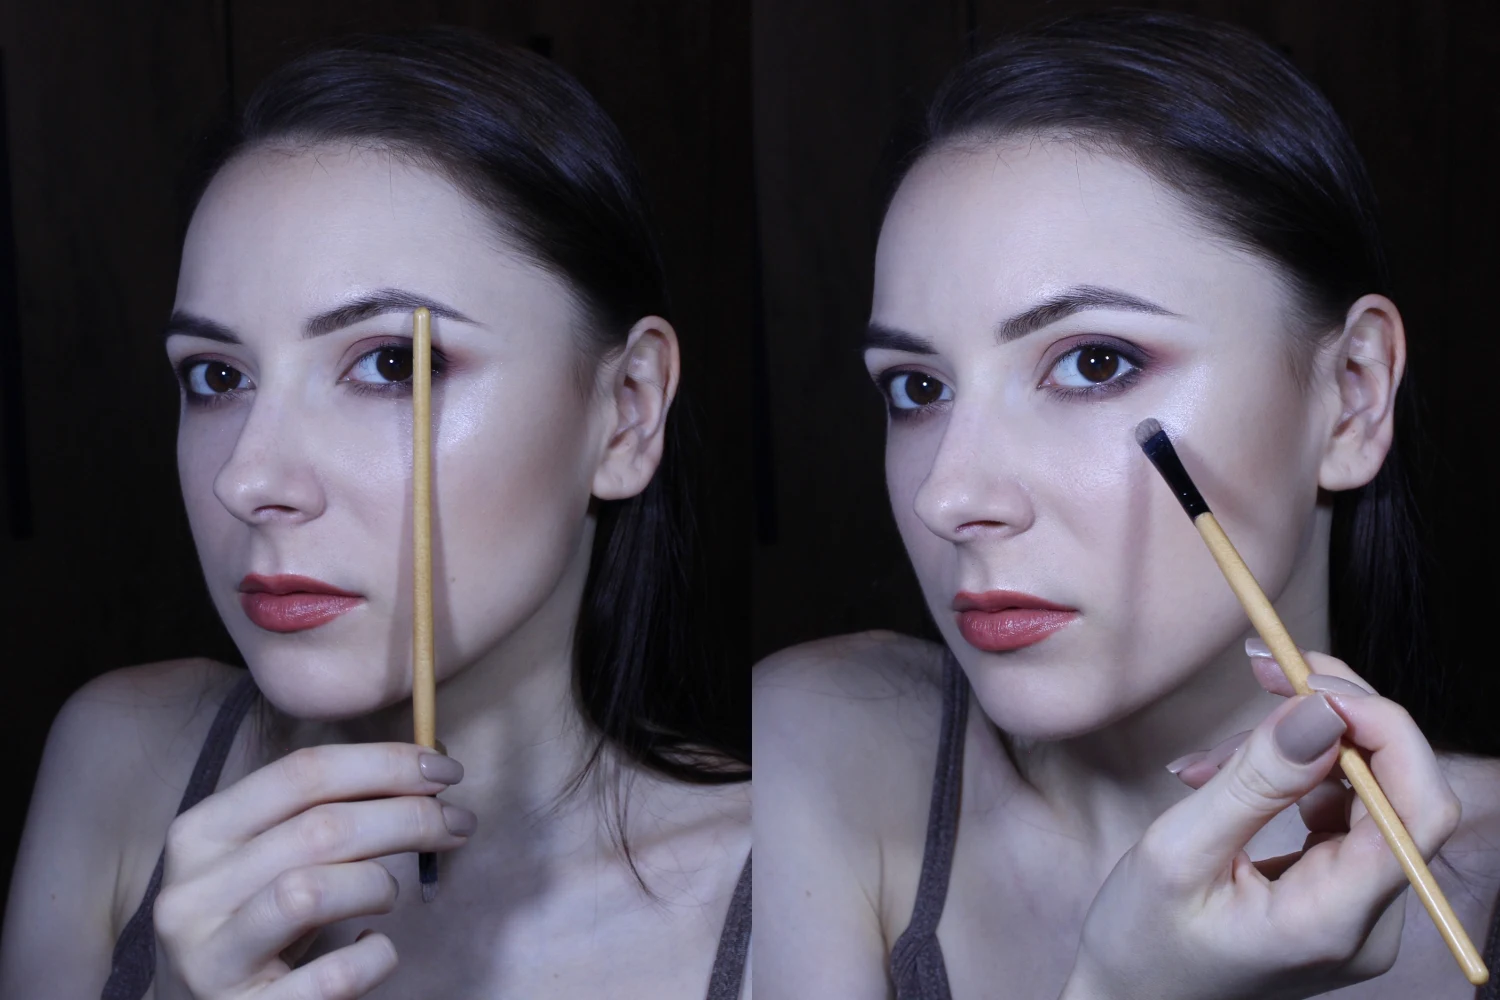 makeup pictorial on how to highlight and contour light skin complexion